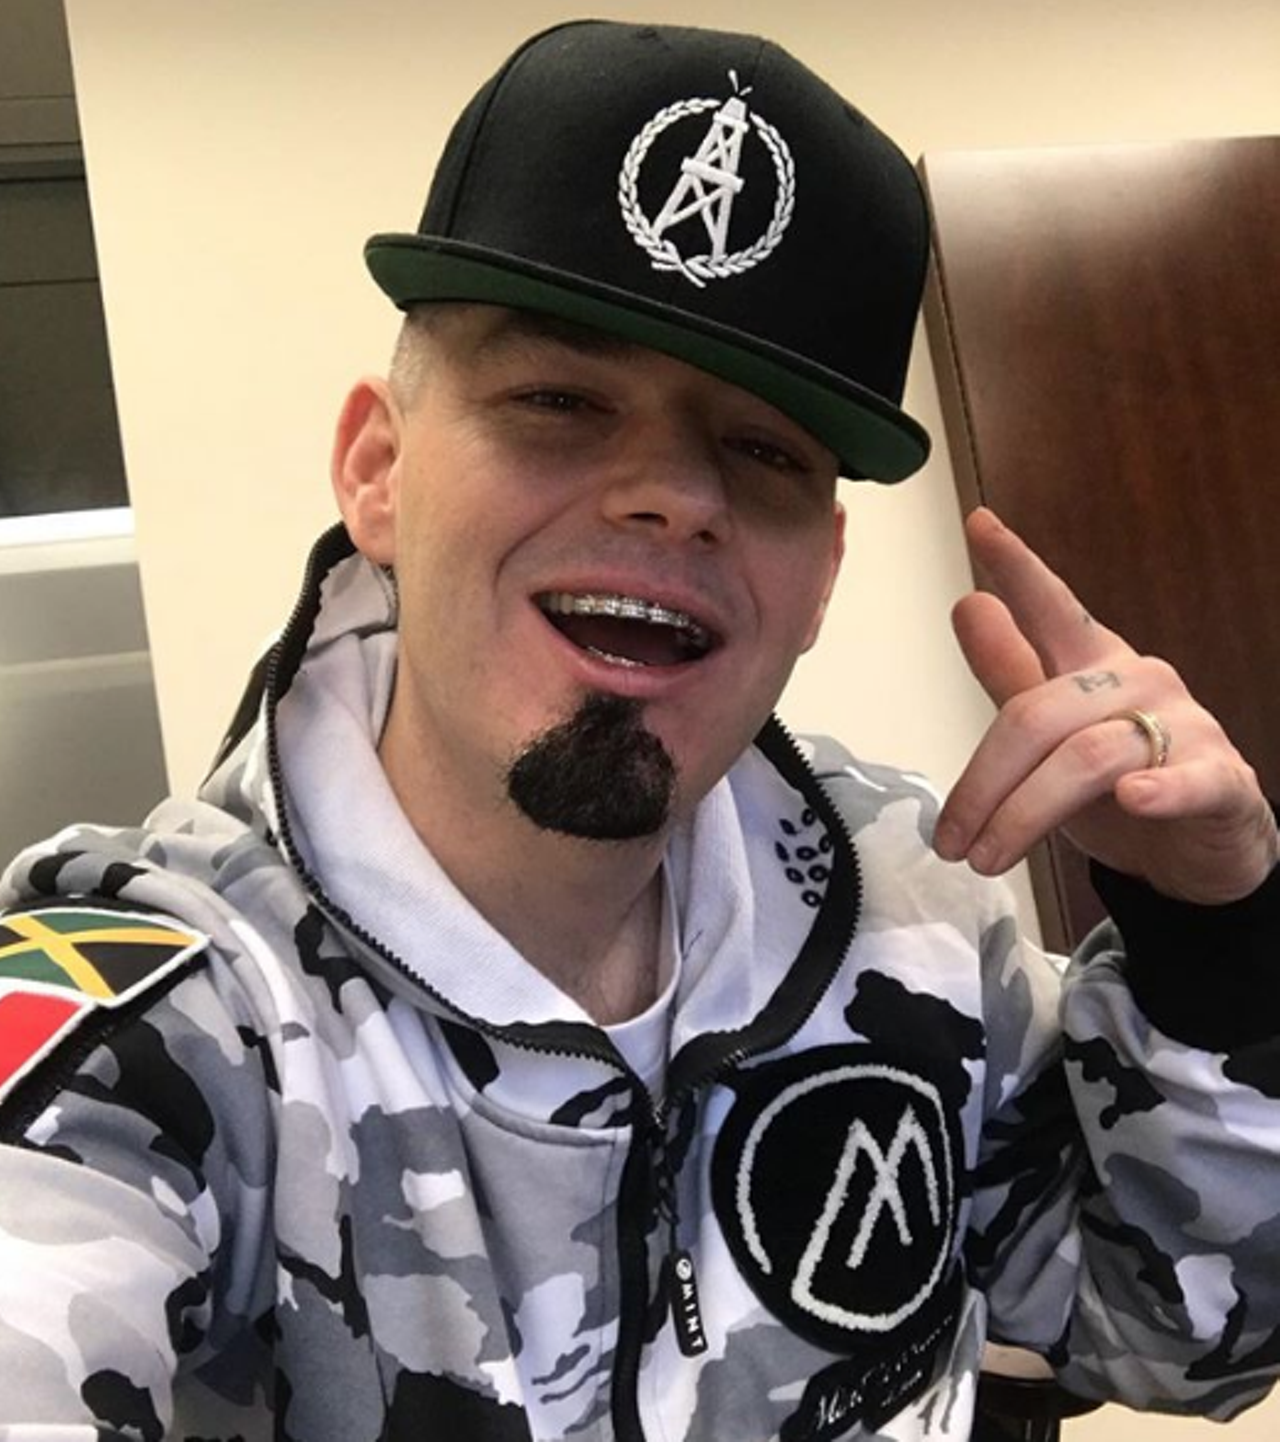 Paul Wall – “Gimme That”
“I’ve been on the grind
chasin' paper all over the Texas state
from Dallas To San Antonio my resume is great
I've been holdin' my weight”
Photo via Instagram / paulwallbaby